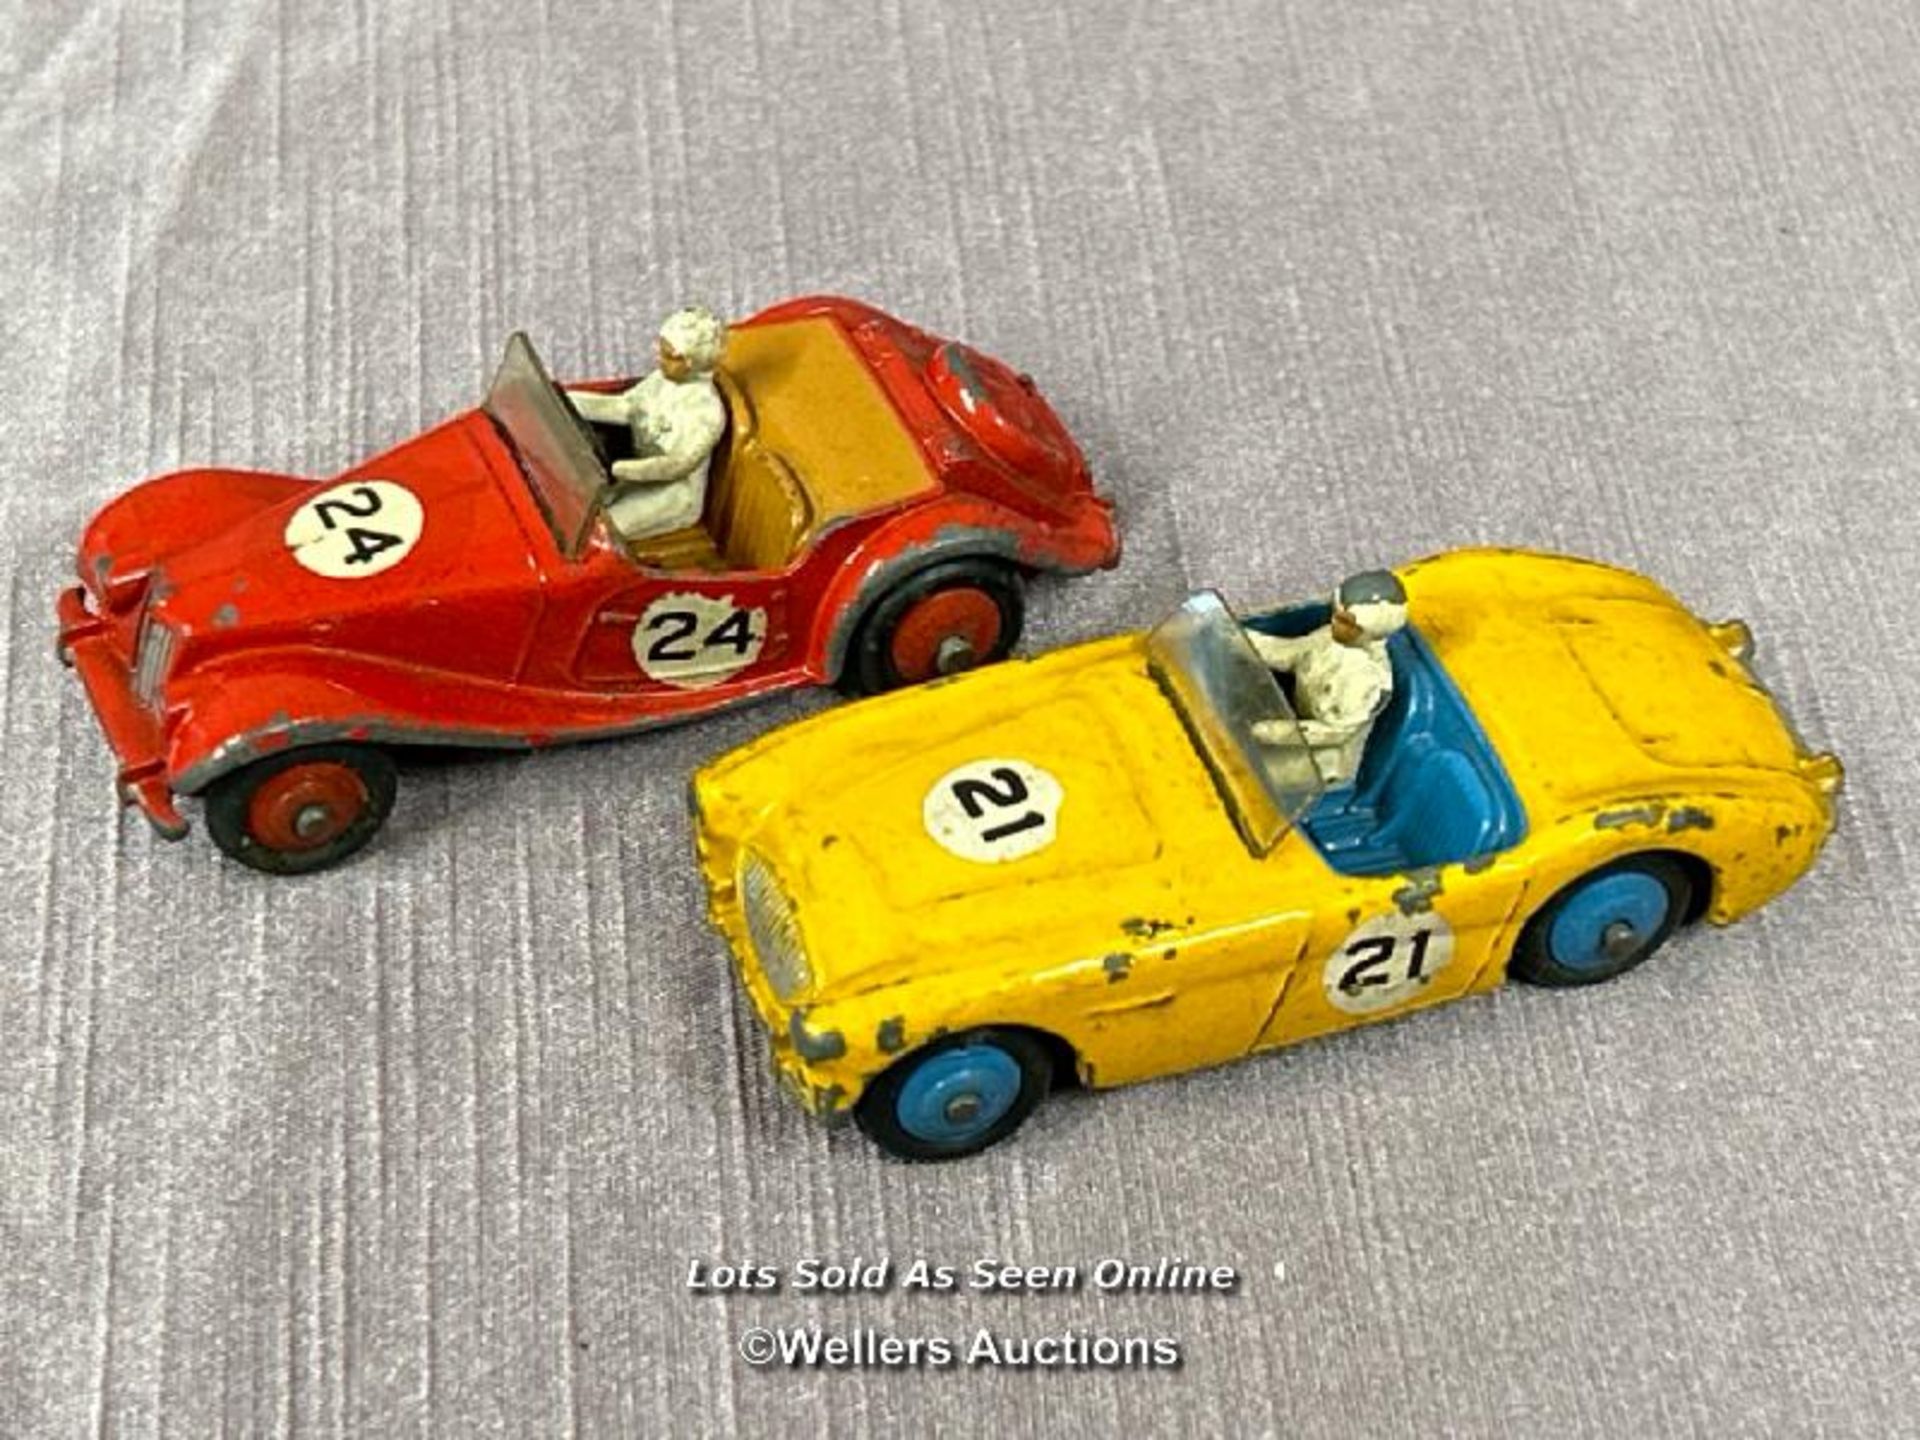 TWO DINKY DIE CAST RACING CARS INCLUDING MG MIDGET NO. 108 AND AUSTIN HEALEY NO. 109